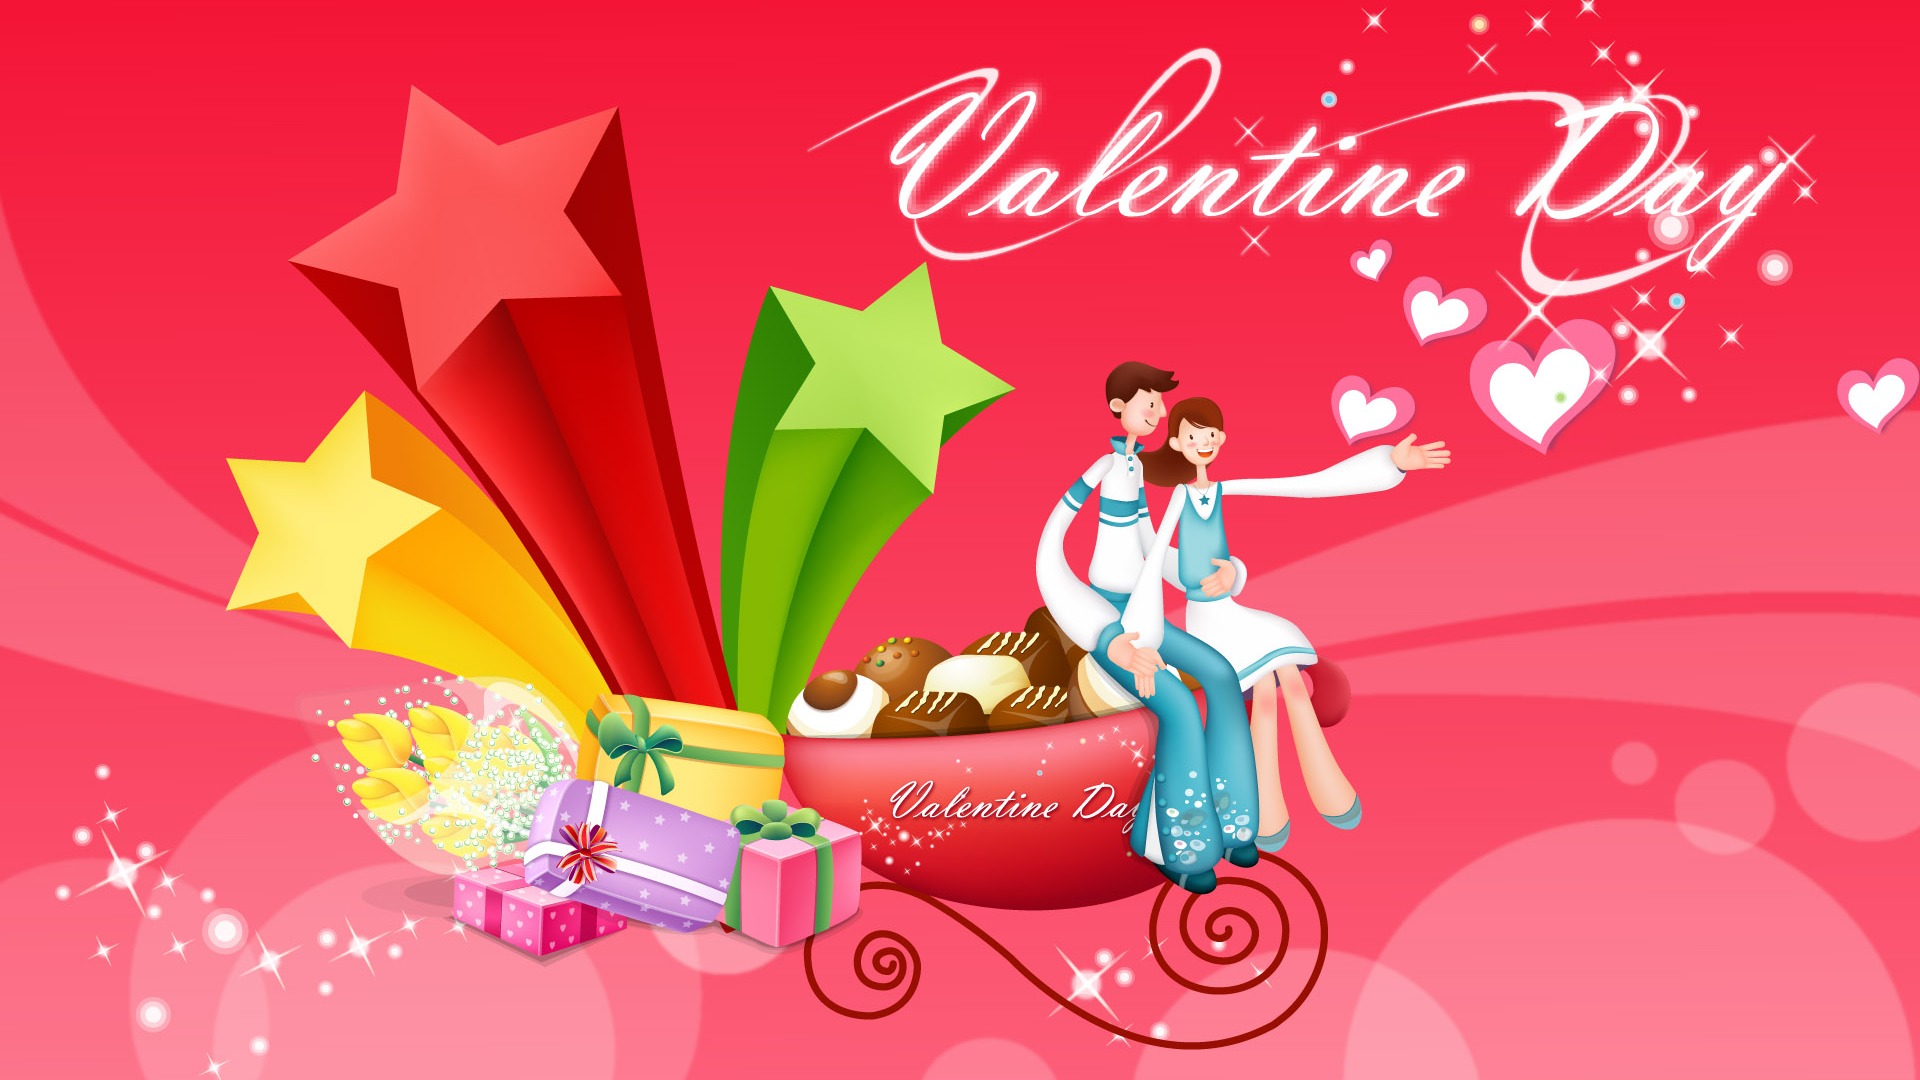 Valentine's Day Theme Wallpapers (2) #1 - 1920x1080